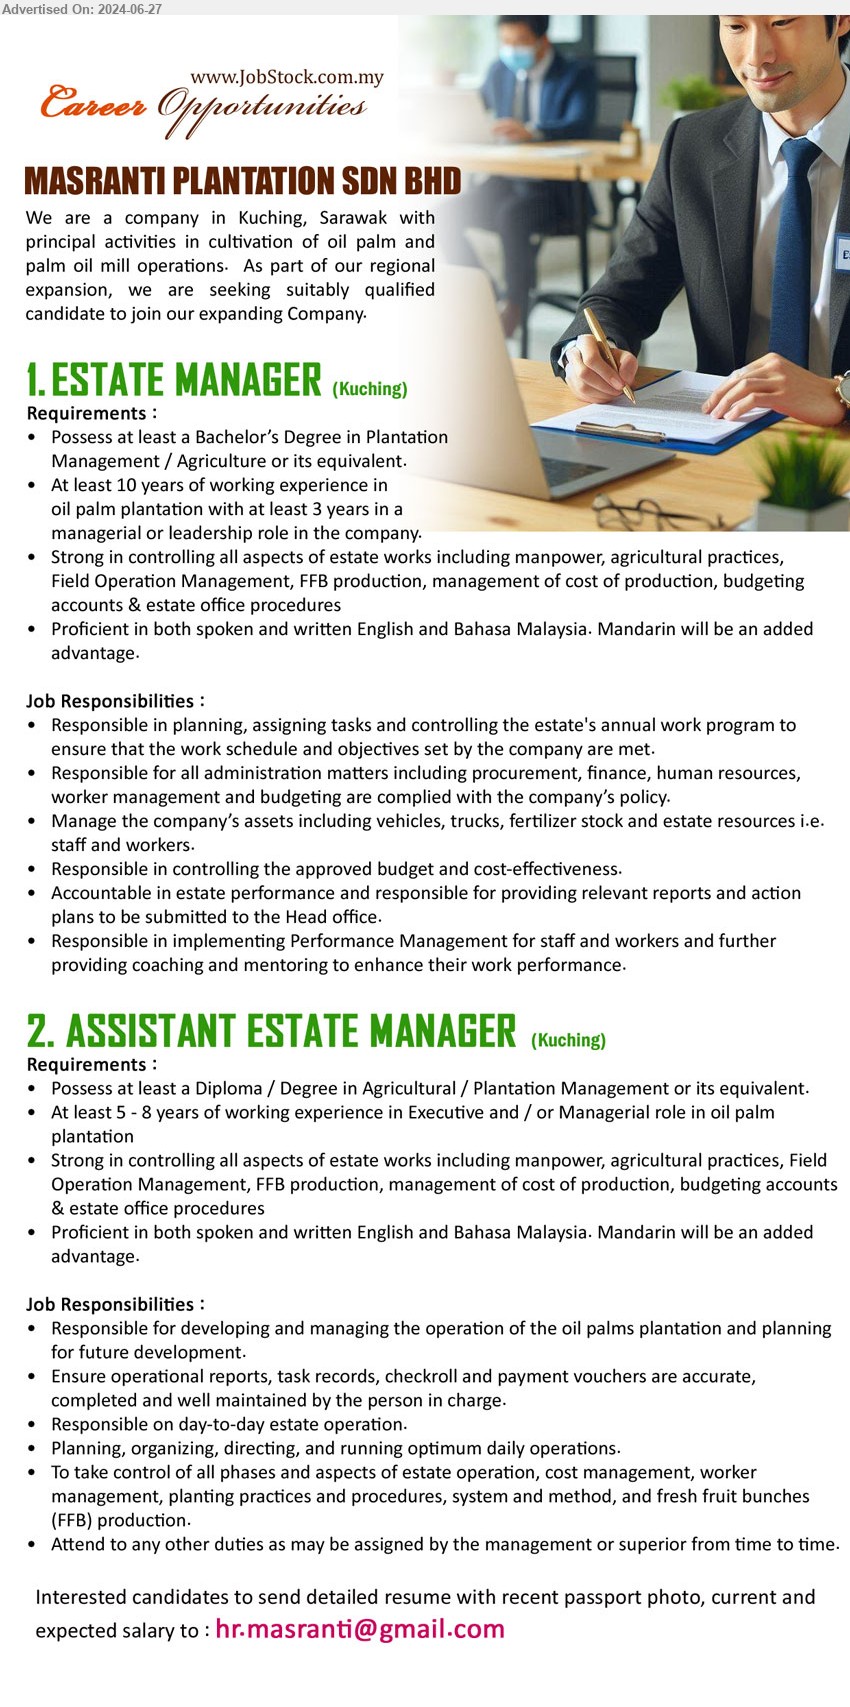 MASRANTI PLANTATION SDN BHD - 1. ESTATE MANAGER (Kuching), Bachelor’s Degree in Plantation Management / Agriculture, At least 10 years of working experience in oil palm plantation with at least 3 years in a managerial or leadership role in the company....
2. ASSISTANT ESTATE MANAGER  (Kuching), Diploma / Degree in Agricultural / Plantation Management, At least 5 - 8 years of working experience in Executive and / or Managerial role in oil palm plantation,...
Email resume to ...